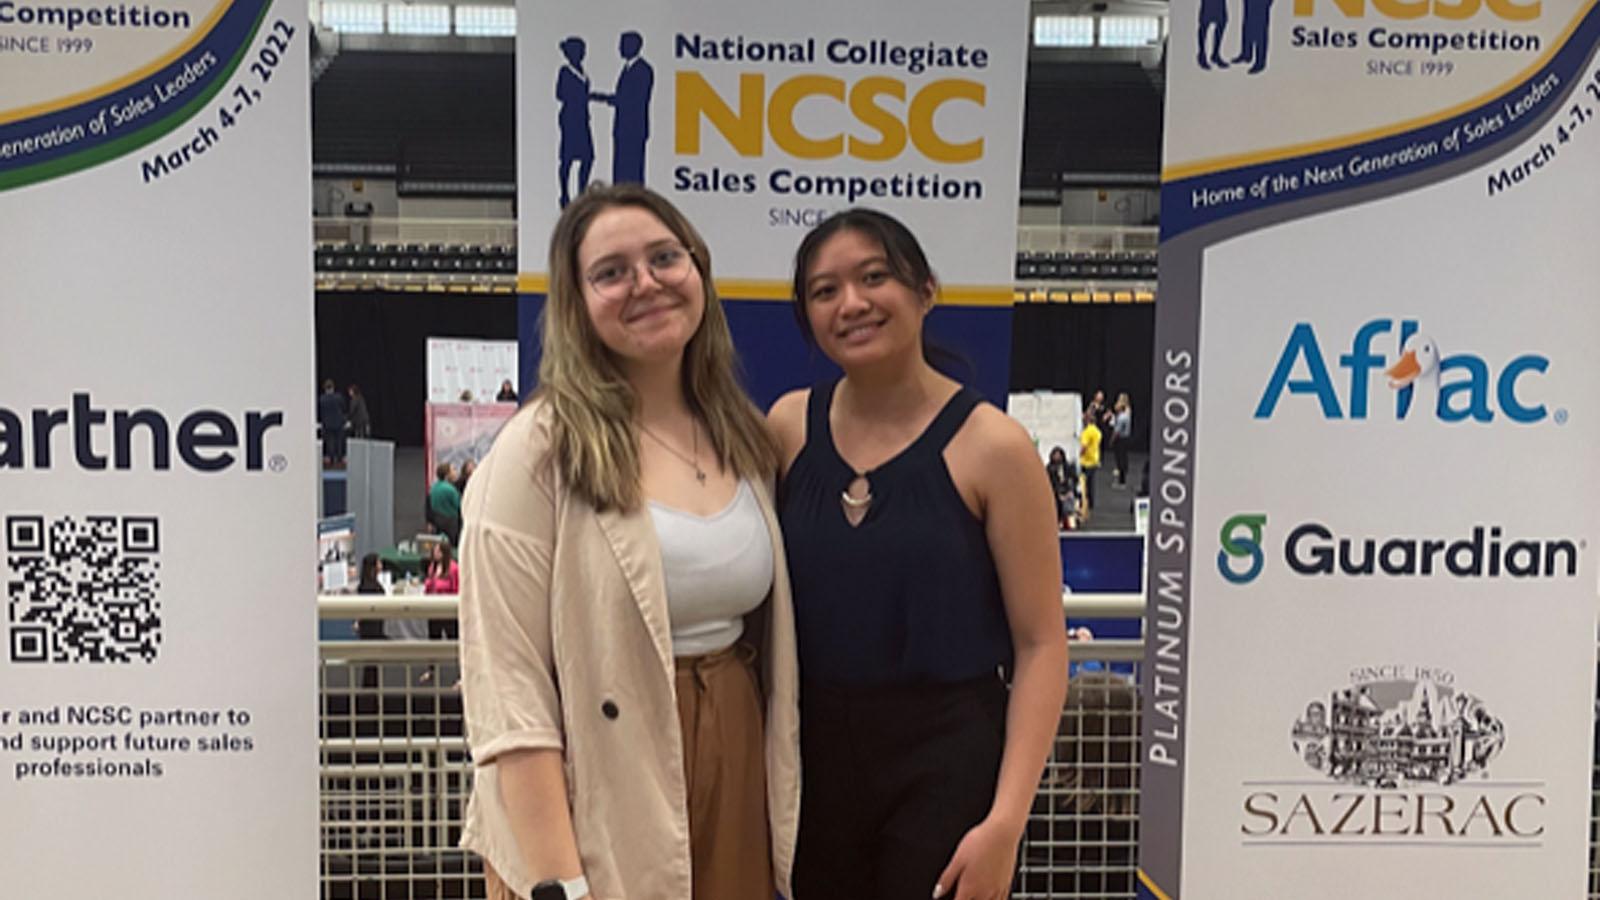 Lubin Sales Team competitors Rosemary Gleason and Katelyn Guy compete at NCSC with flying colors